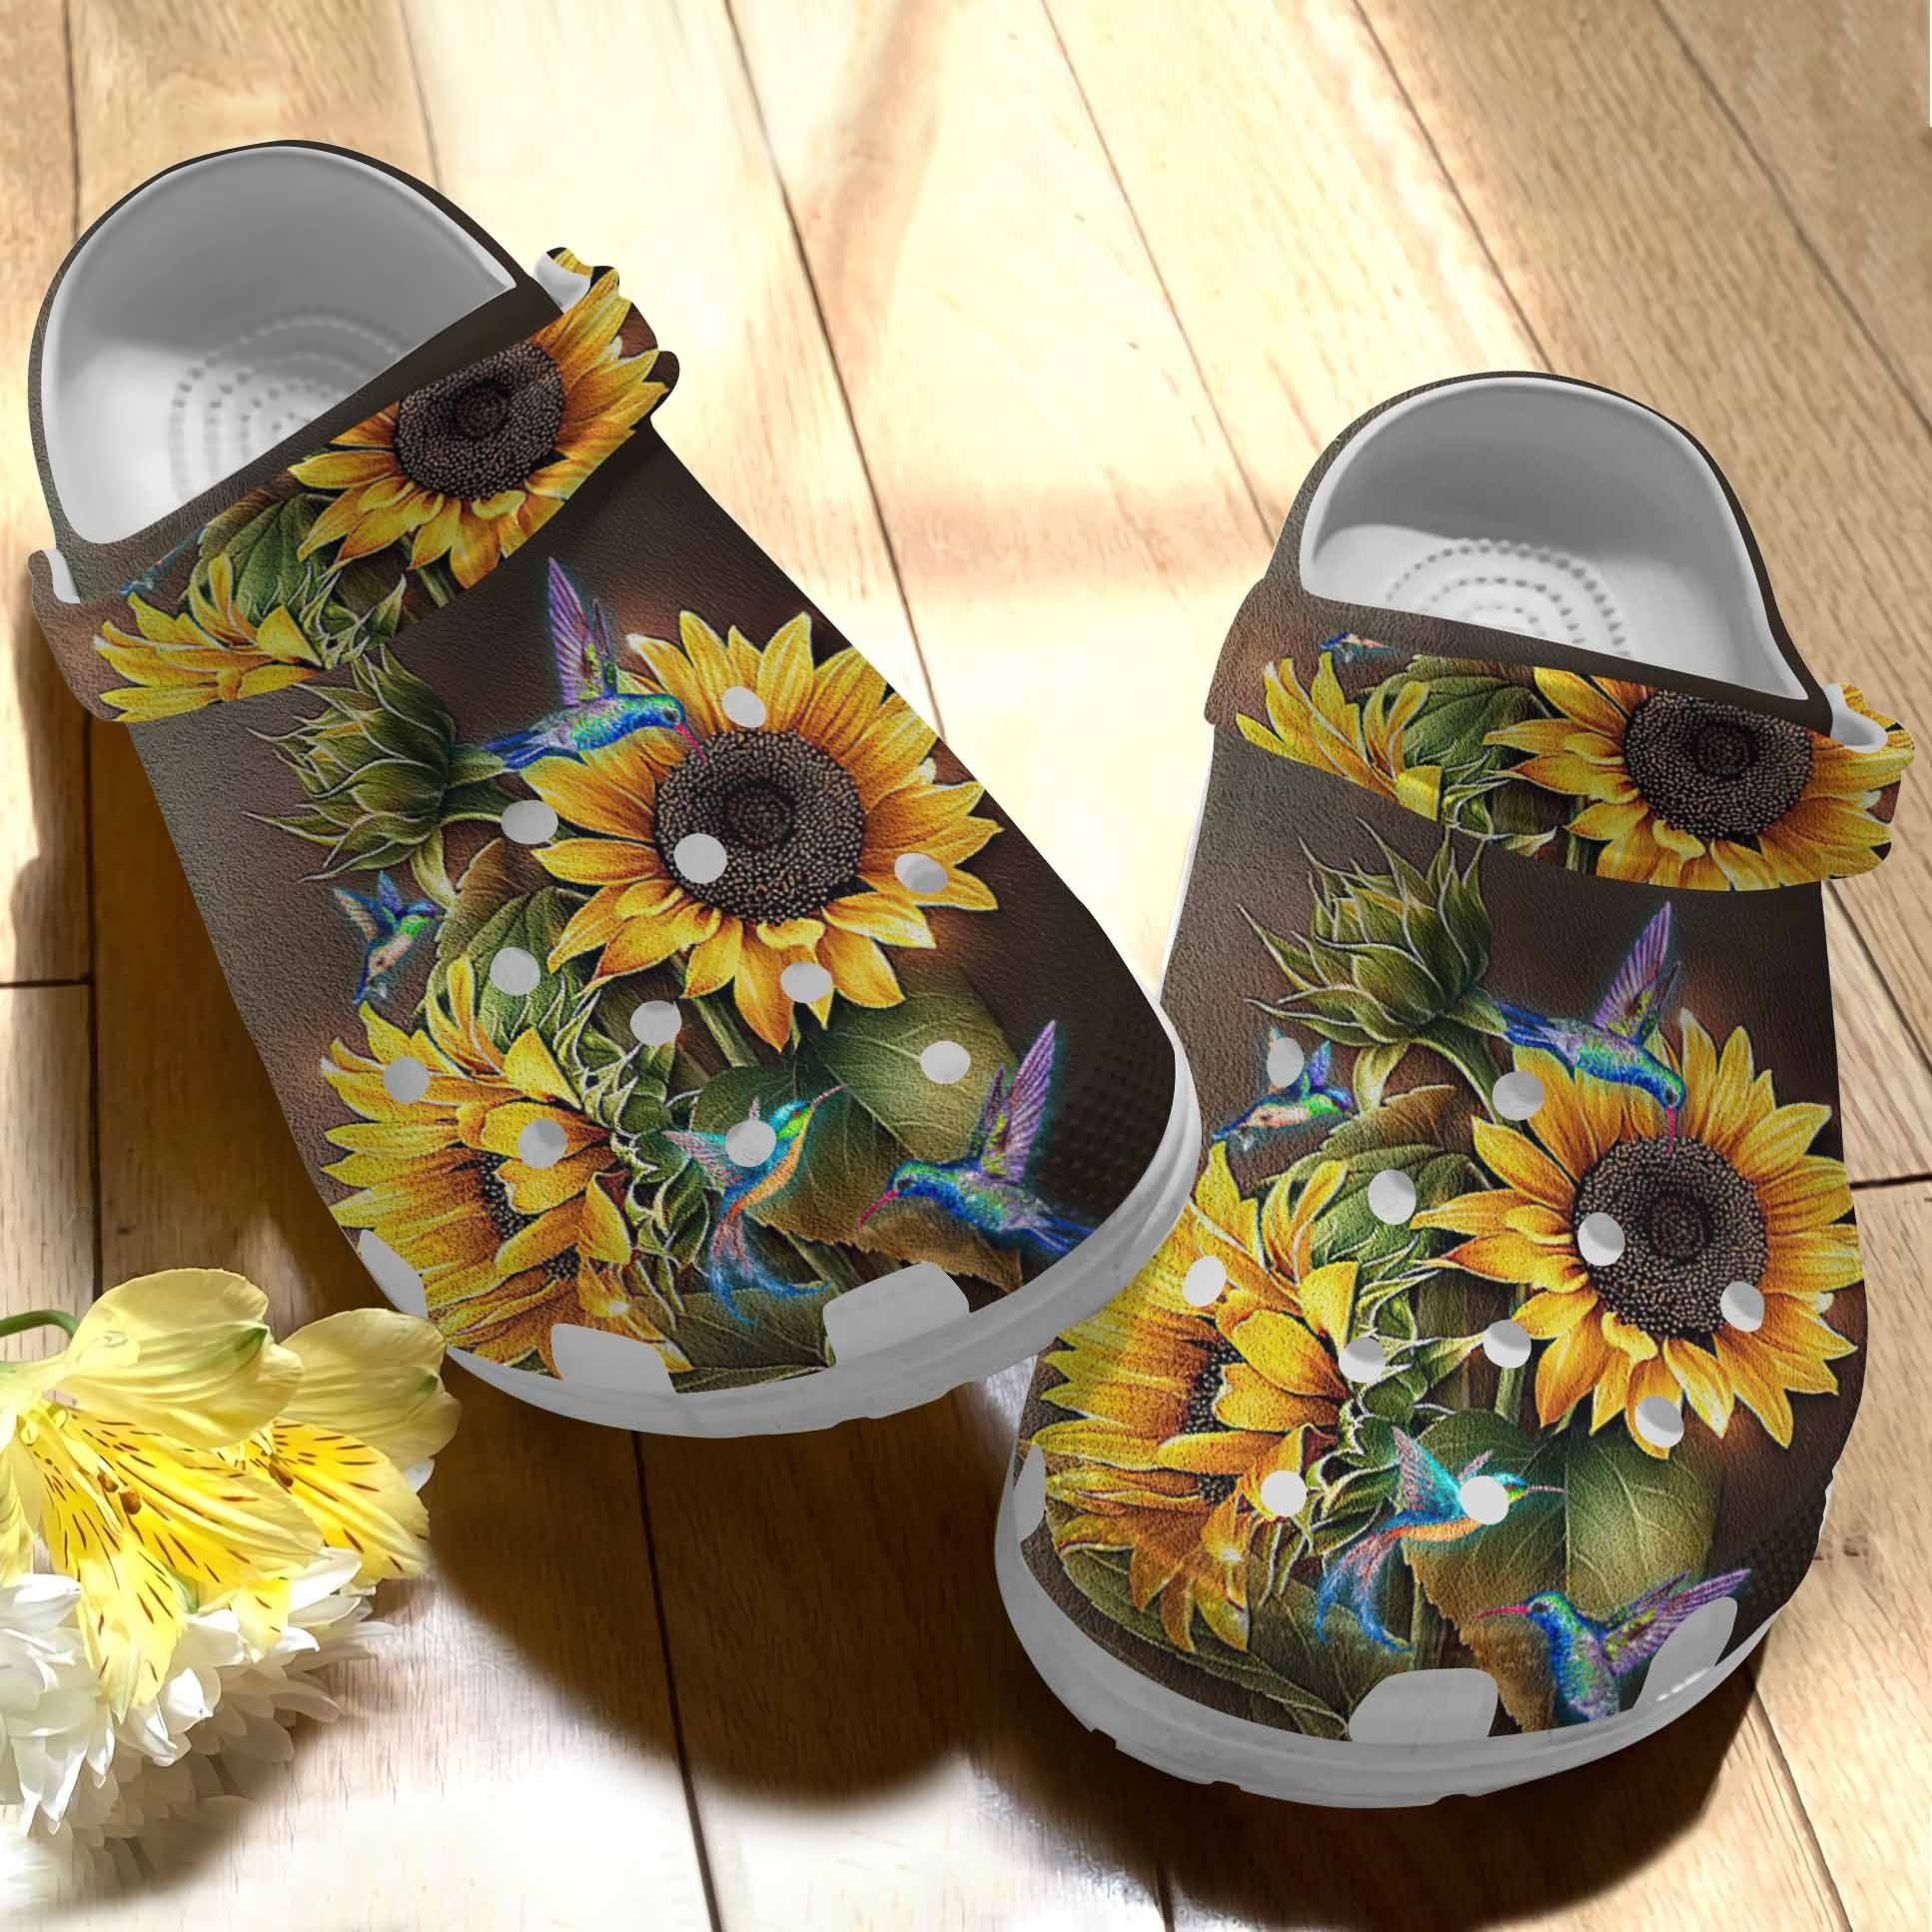 Sunflower With Hummingbird Shoe - Hummingbird Flower Outdoor Shoes Birthday Gift For Woman Girl Grandma Mother Sister Daughter